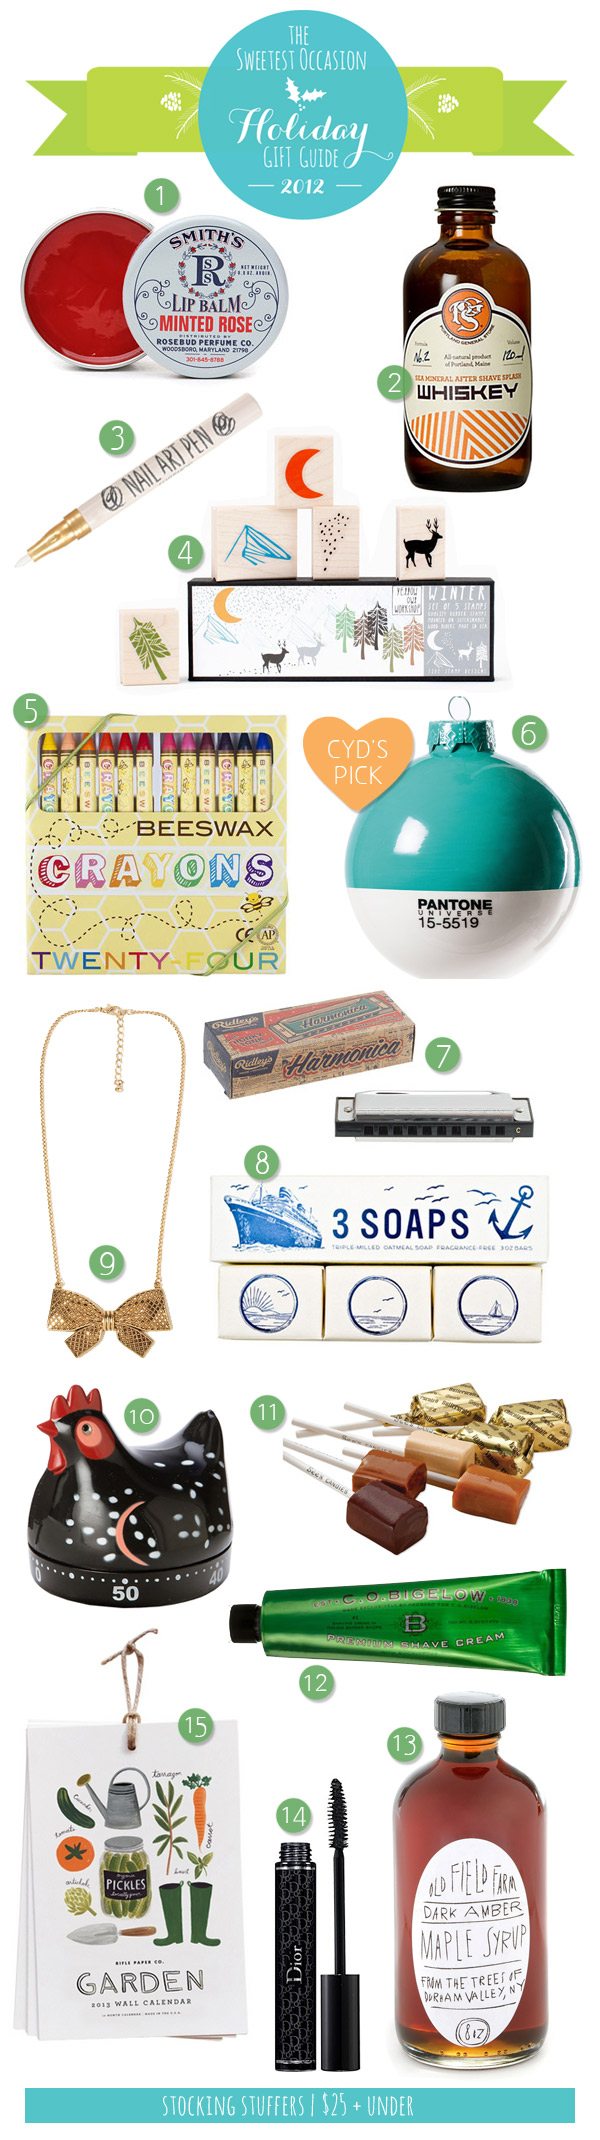 The Gift Guide: Stocking Stuffers | The Sweetest Occasion